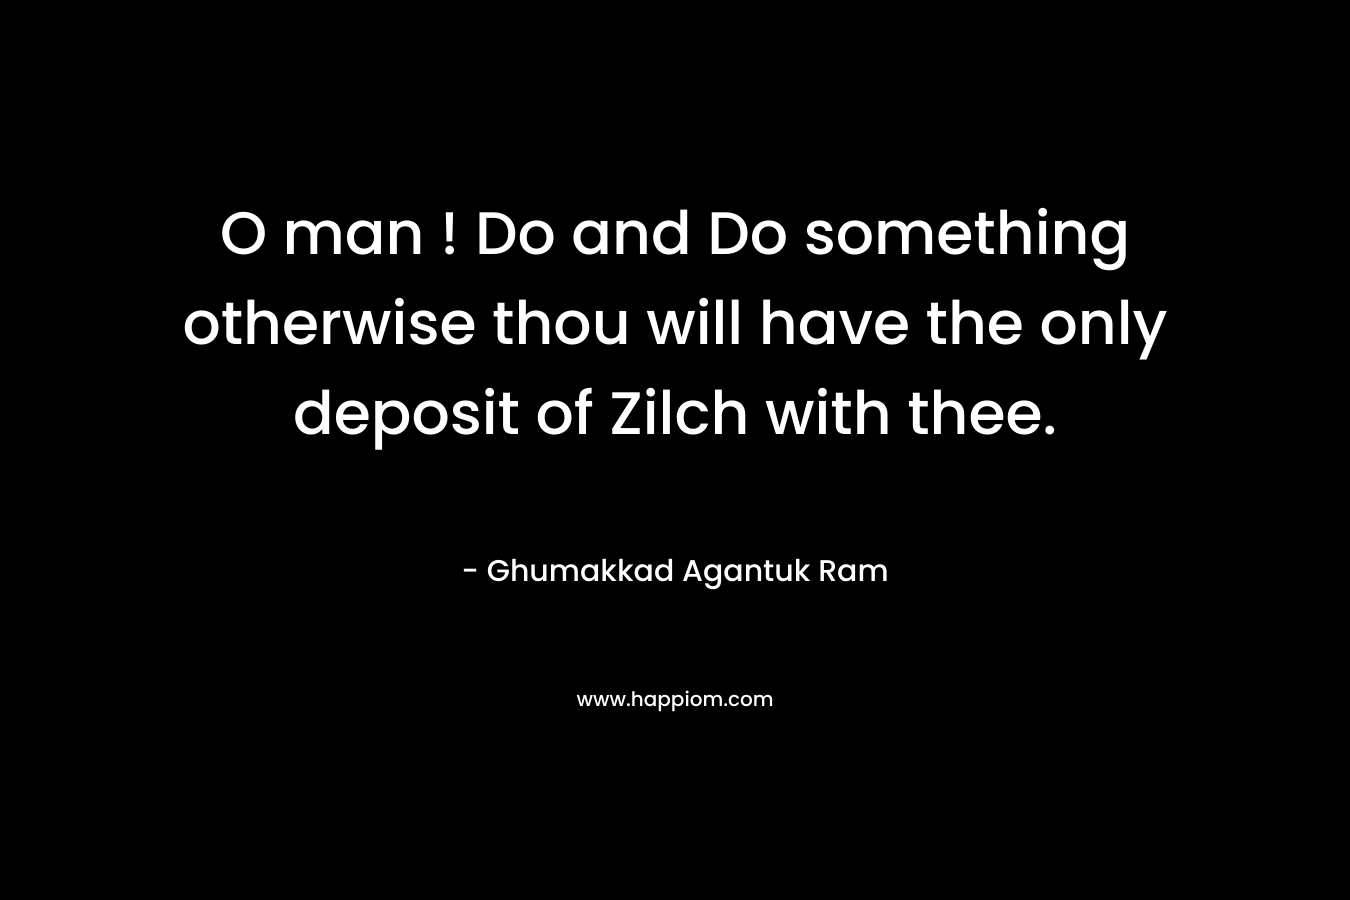 O man ! Do and Do something otherwise thou will have the only deposit of Zilch with thee.